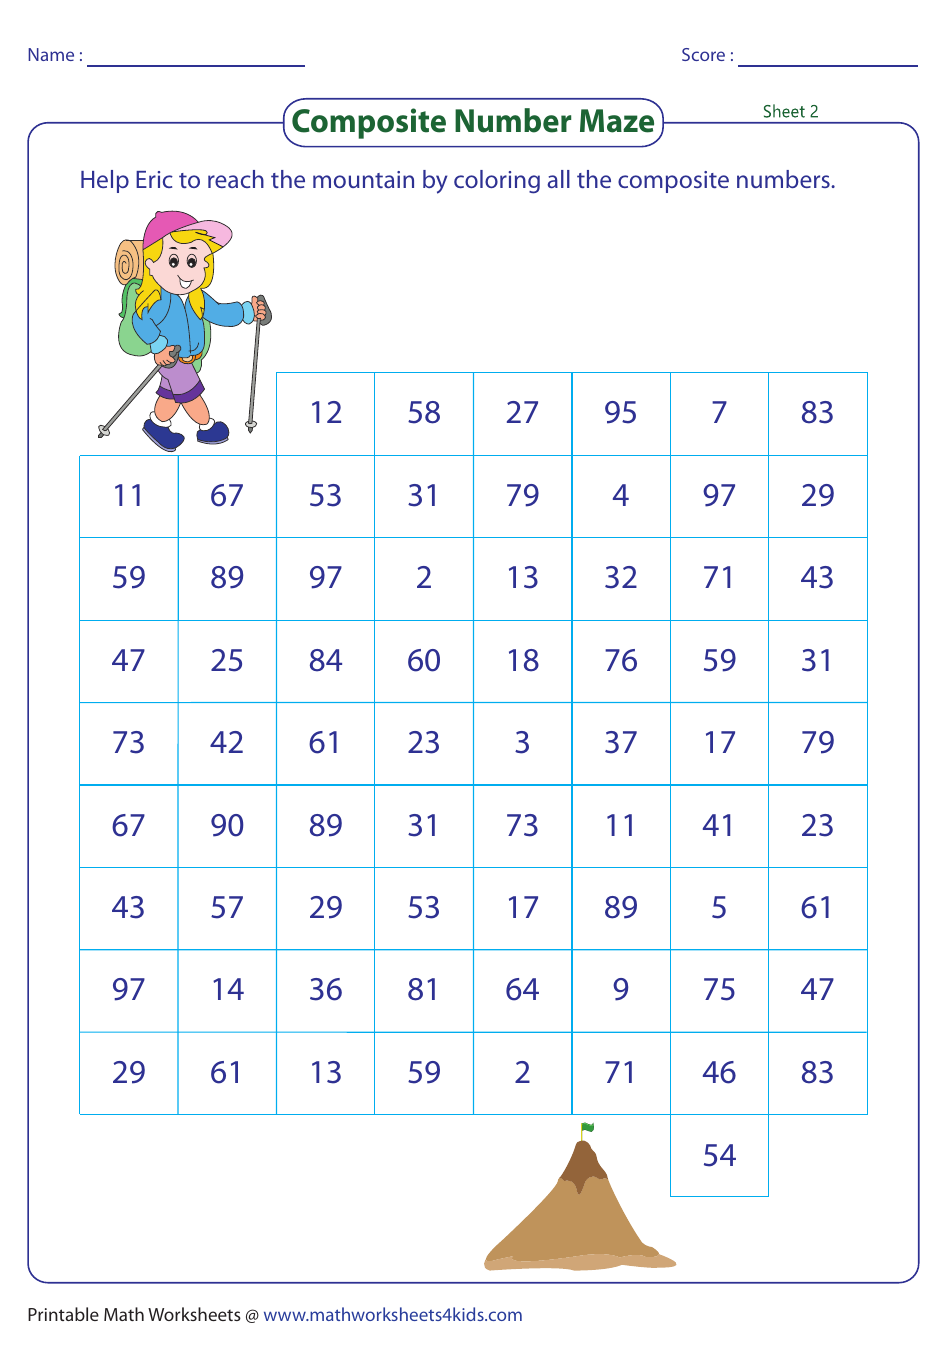 composite-number-maze-worksheet-with-answer-key-hiking-download-printable-pdf-templateroller